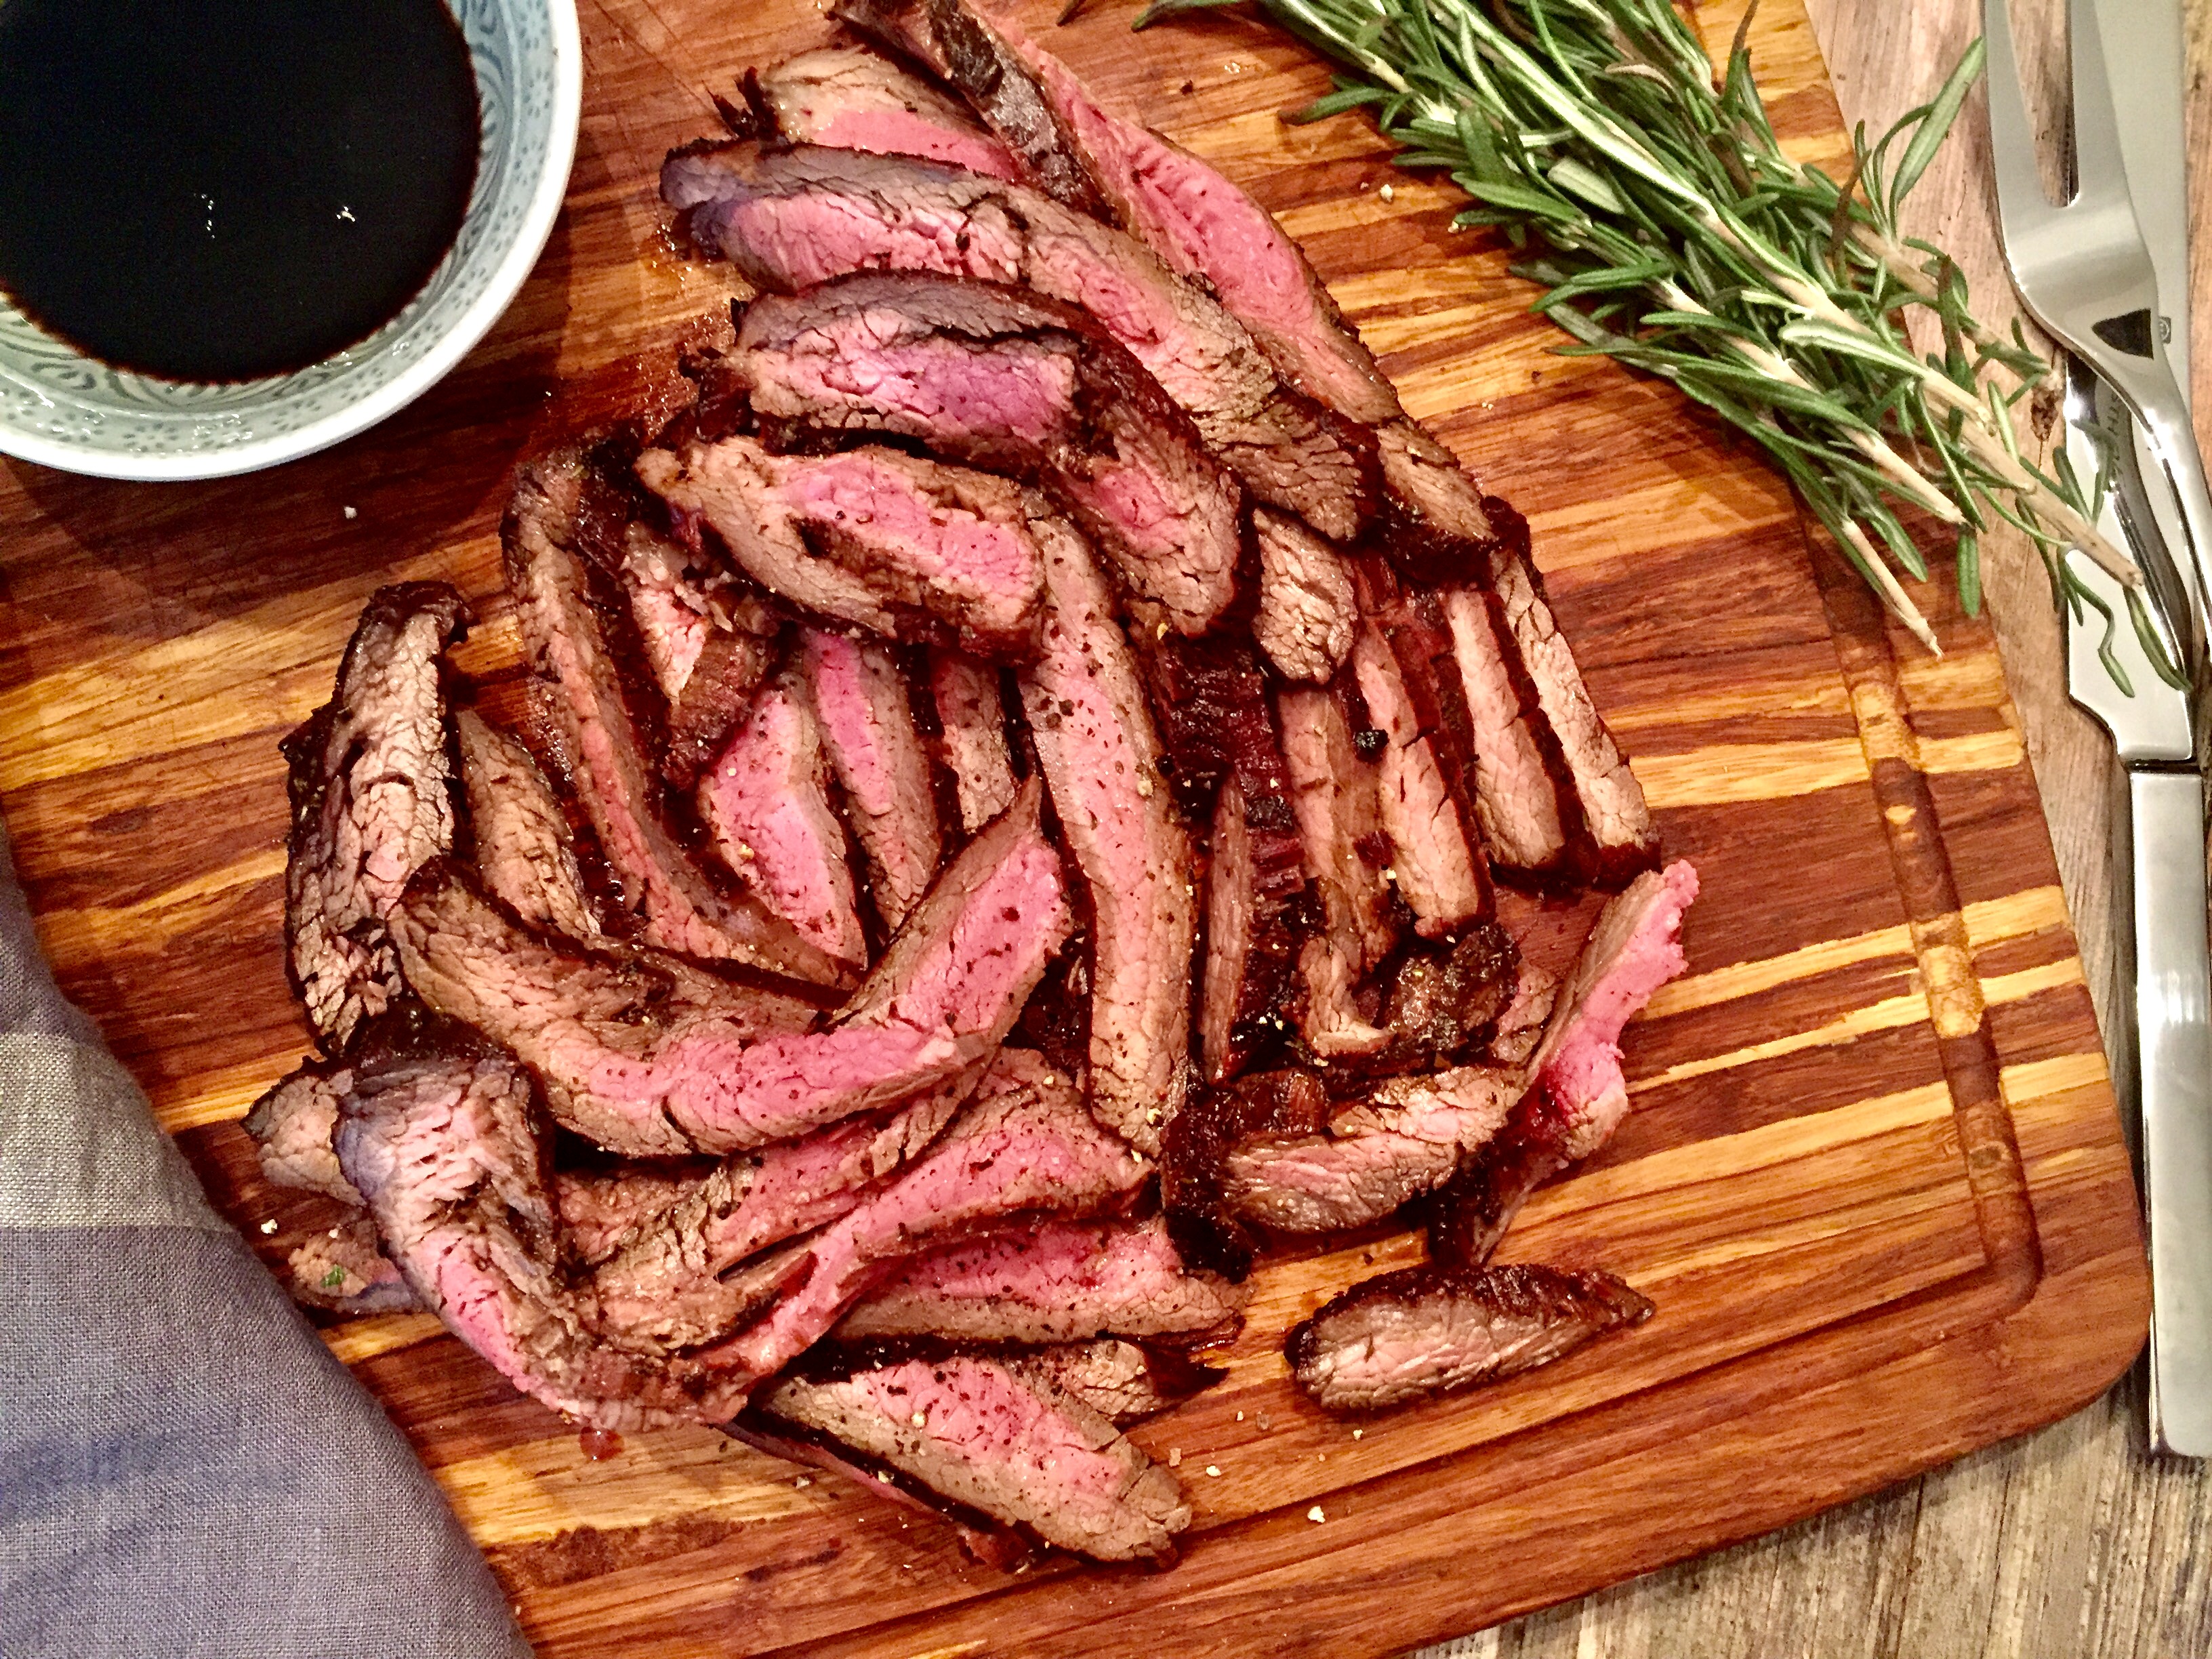 Balsamic and Rosemary Marinated Flank Steak - A Hint of Wine